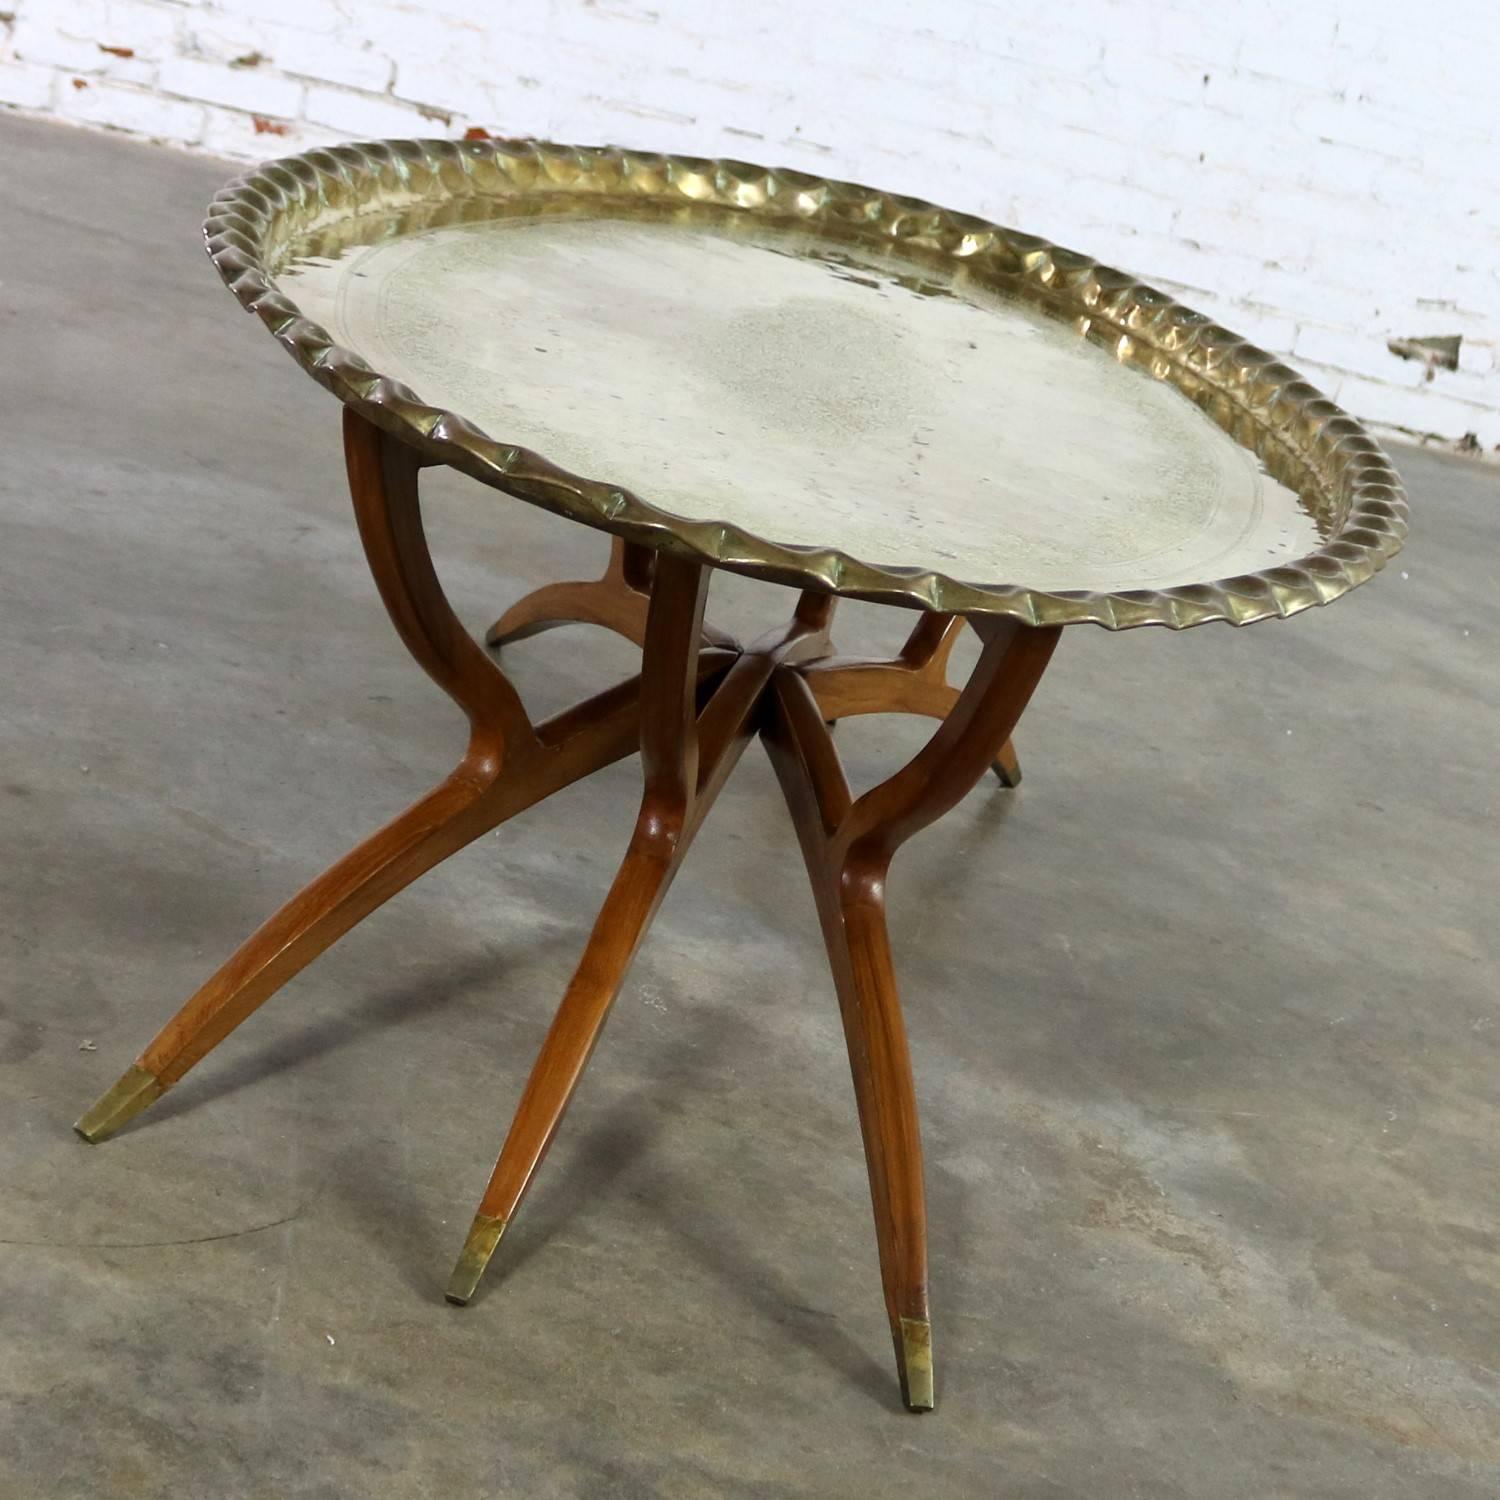 Anglo-Indian Vintage Indian Moroccan Style Oval Tray Top Spider Leg Coffee Table